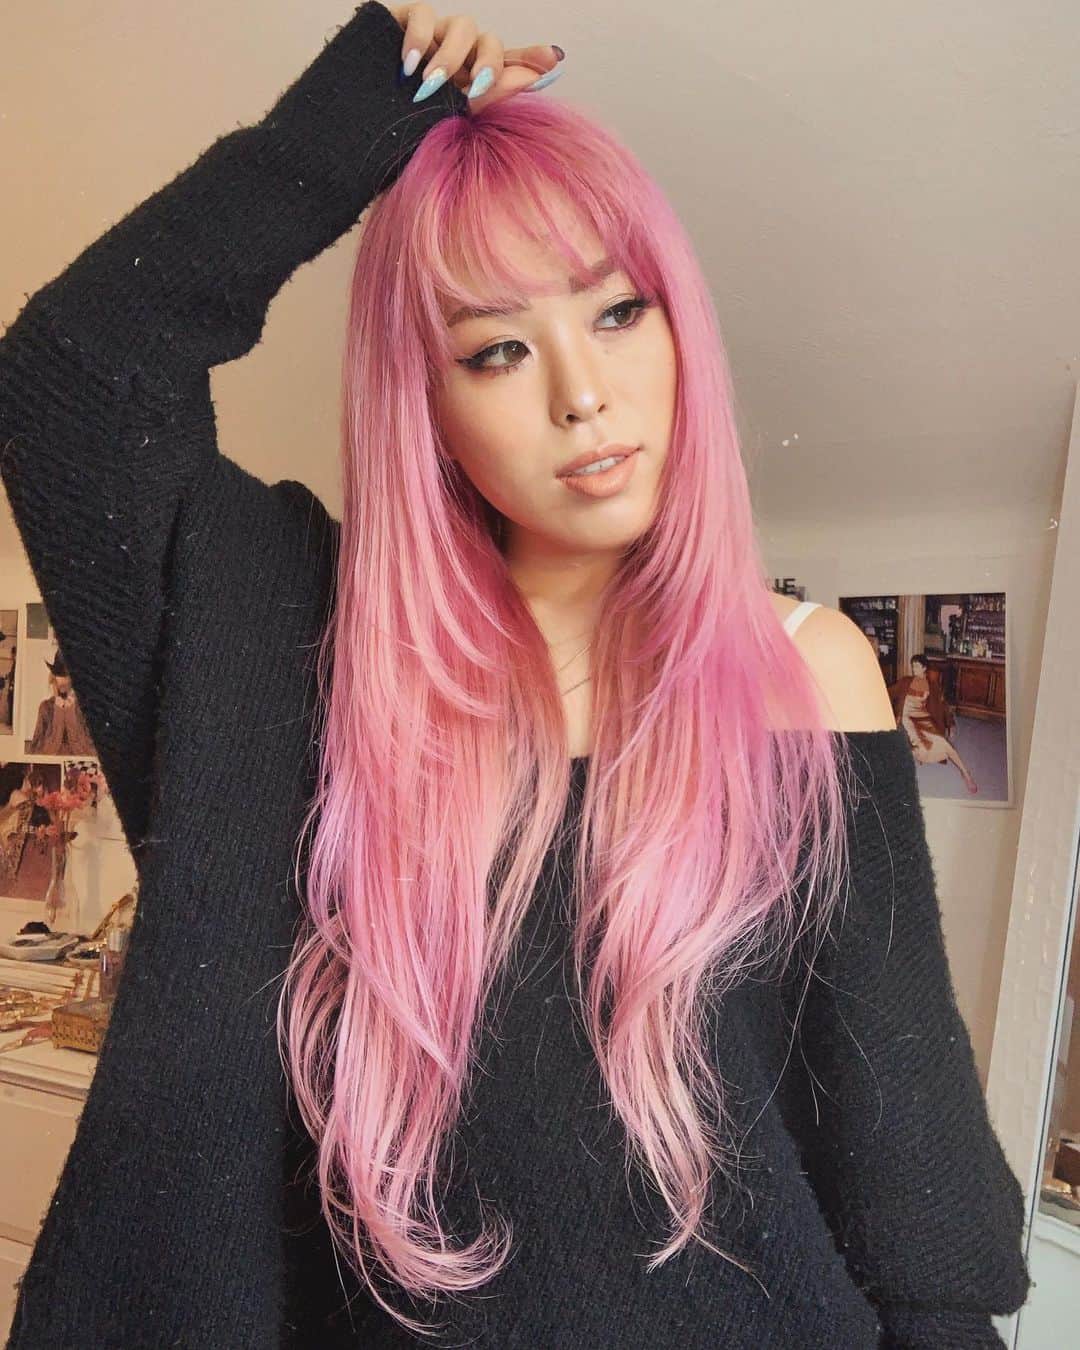 AikA♡ • 愛香 | JP Blogger • ブロガーさんのインスタグラム写真 - (AikA♡ • 愛香 | JP Blogger • ブロガーInstagram)「Pink mermaid for lifeeee 💕🌸 #swipeleft Decided to switch things up for Hawaii 🌺 even tho I am still so obsessed with my silver/gray color at the moment! I'm not sure what color it will turn out though tbh, so here are some pics of my pink hair over the years 💓 It was hard to pick only 10 haha 😆 ﻿ My first ever pink hair was back 4 years ago ( the last photo! ) Who remembers all these selfies and pics!? 😂🤩 If you do, wow you are so loyal 👏🏻👏🏻✨ More of my hair journey 👉🏻 #loveclosethairnmakeup﻿ ﻿ ⋆ ⋆ ⋆ ⋆ ﻿ ﻿ 今日ゎサロンday 💇🏼‍♀️💕﻿ 来週のハワイにためにシルバーグレーから﻿ カラーチェンジする事にしたのだぁ🧜🏻‍♀️✨﻿ 実際なんの色になるか分からないんだけどww﻿ だから出来上がりまでお楽しみ〜♬😆﻿ ﻿ 今までのピンクヘアーまとめてみたょ💓﻿ ありすぎて10枚選ぶの大変だった💦😂﻿ 最初にピンクにしたのが4年前😳(一番最後の写真🤳🏻)﻿ 10枚全て覚えてる人いる？﻿ もしそうならYOUありがとぉぉ👏🏻👏🏻✨﻿ ﻿ Myヘアーの歴史このハッシュタグから見れちゃうよ👉🏻 #loveclosethairnmakeup ﻿ -﻿ #pinkhair #pinkhairstyle #mermaidhaircolor #asianhaircolor #seattlehairsalon #pinkhairedgirl #ピンクヘアー」3月12日 6時11分 - aikaslovecloset